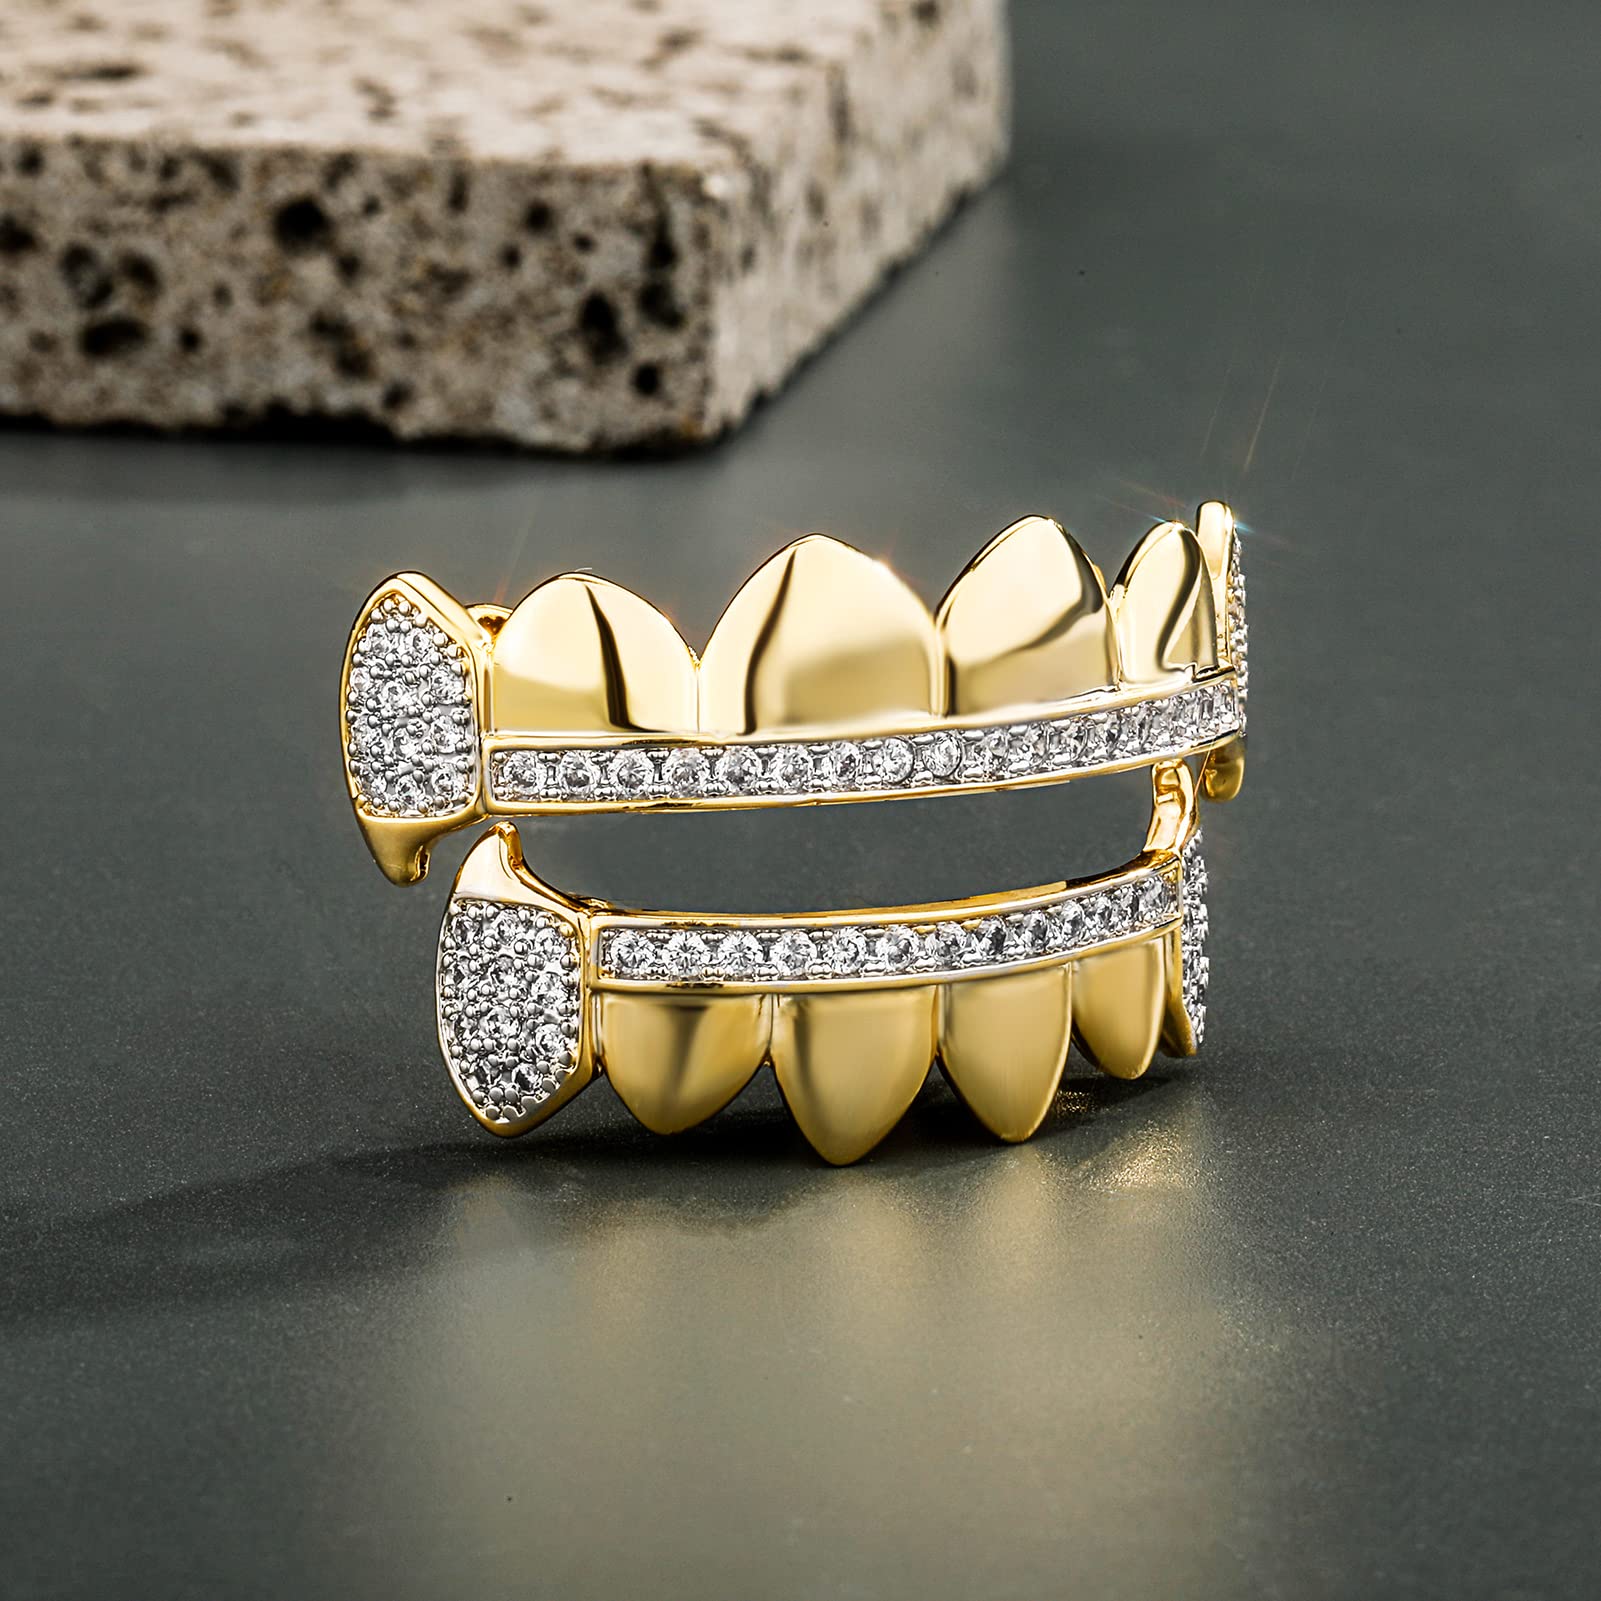 TOPGRILLZ 14K Gold Plated Iced Out CZ Top and Bottom Vampire Fangs Werewolf Grillz for Your Teeth Hip Hop Halloween Accessory